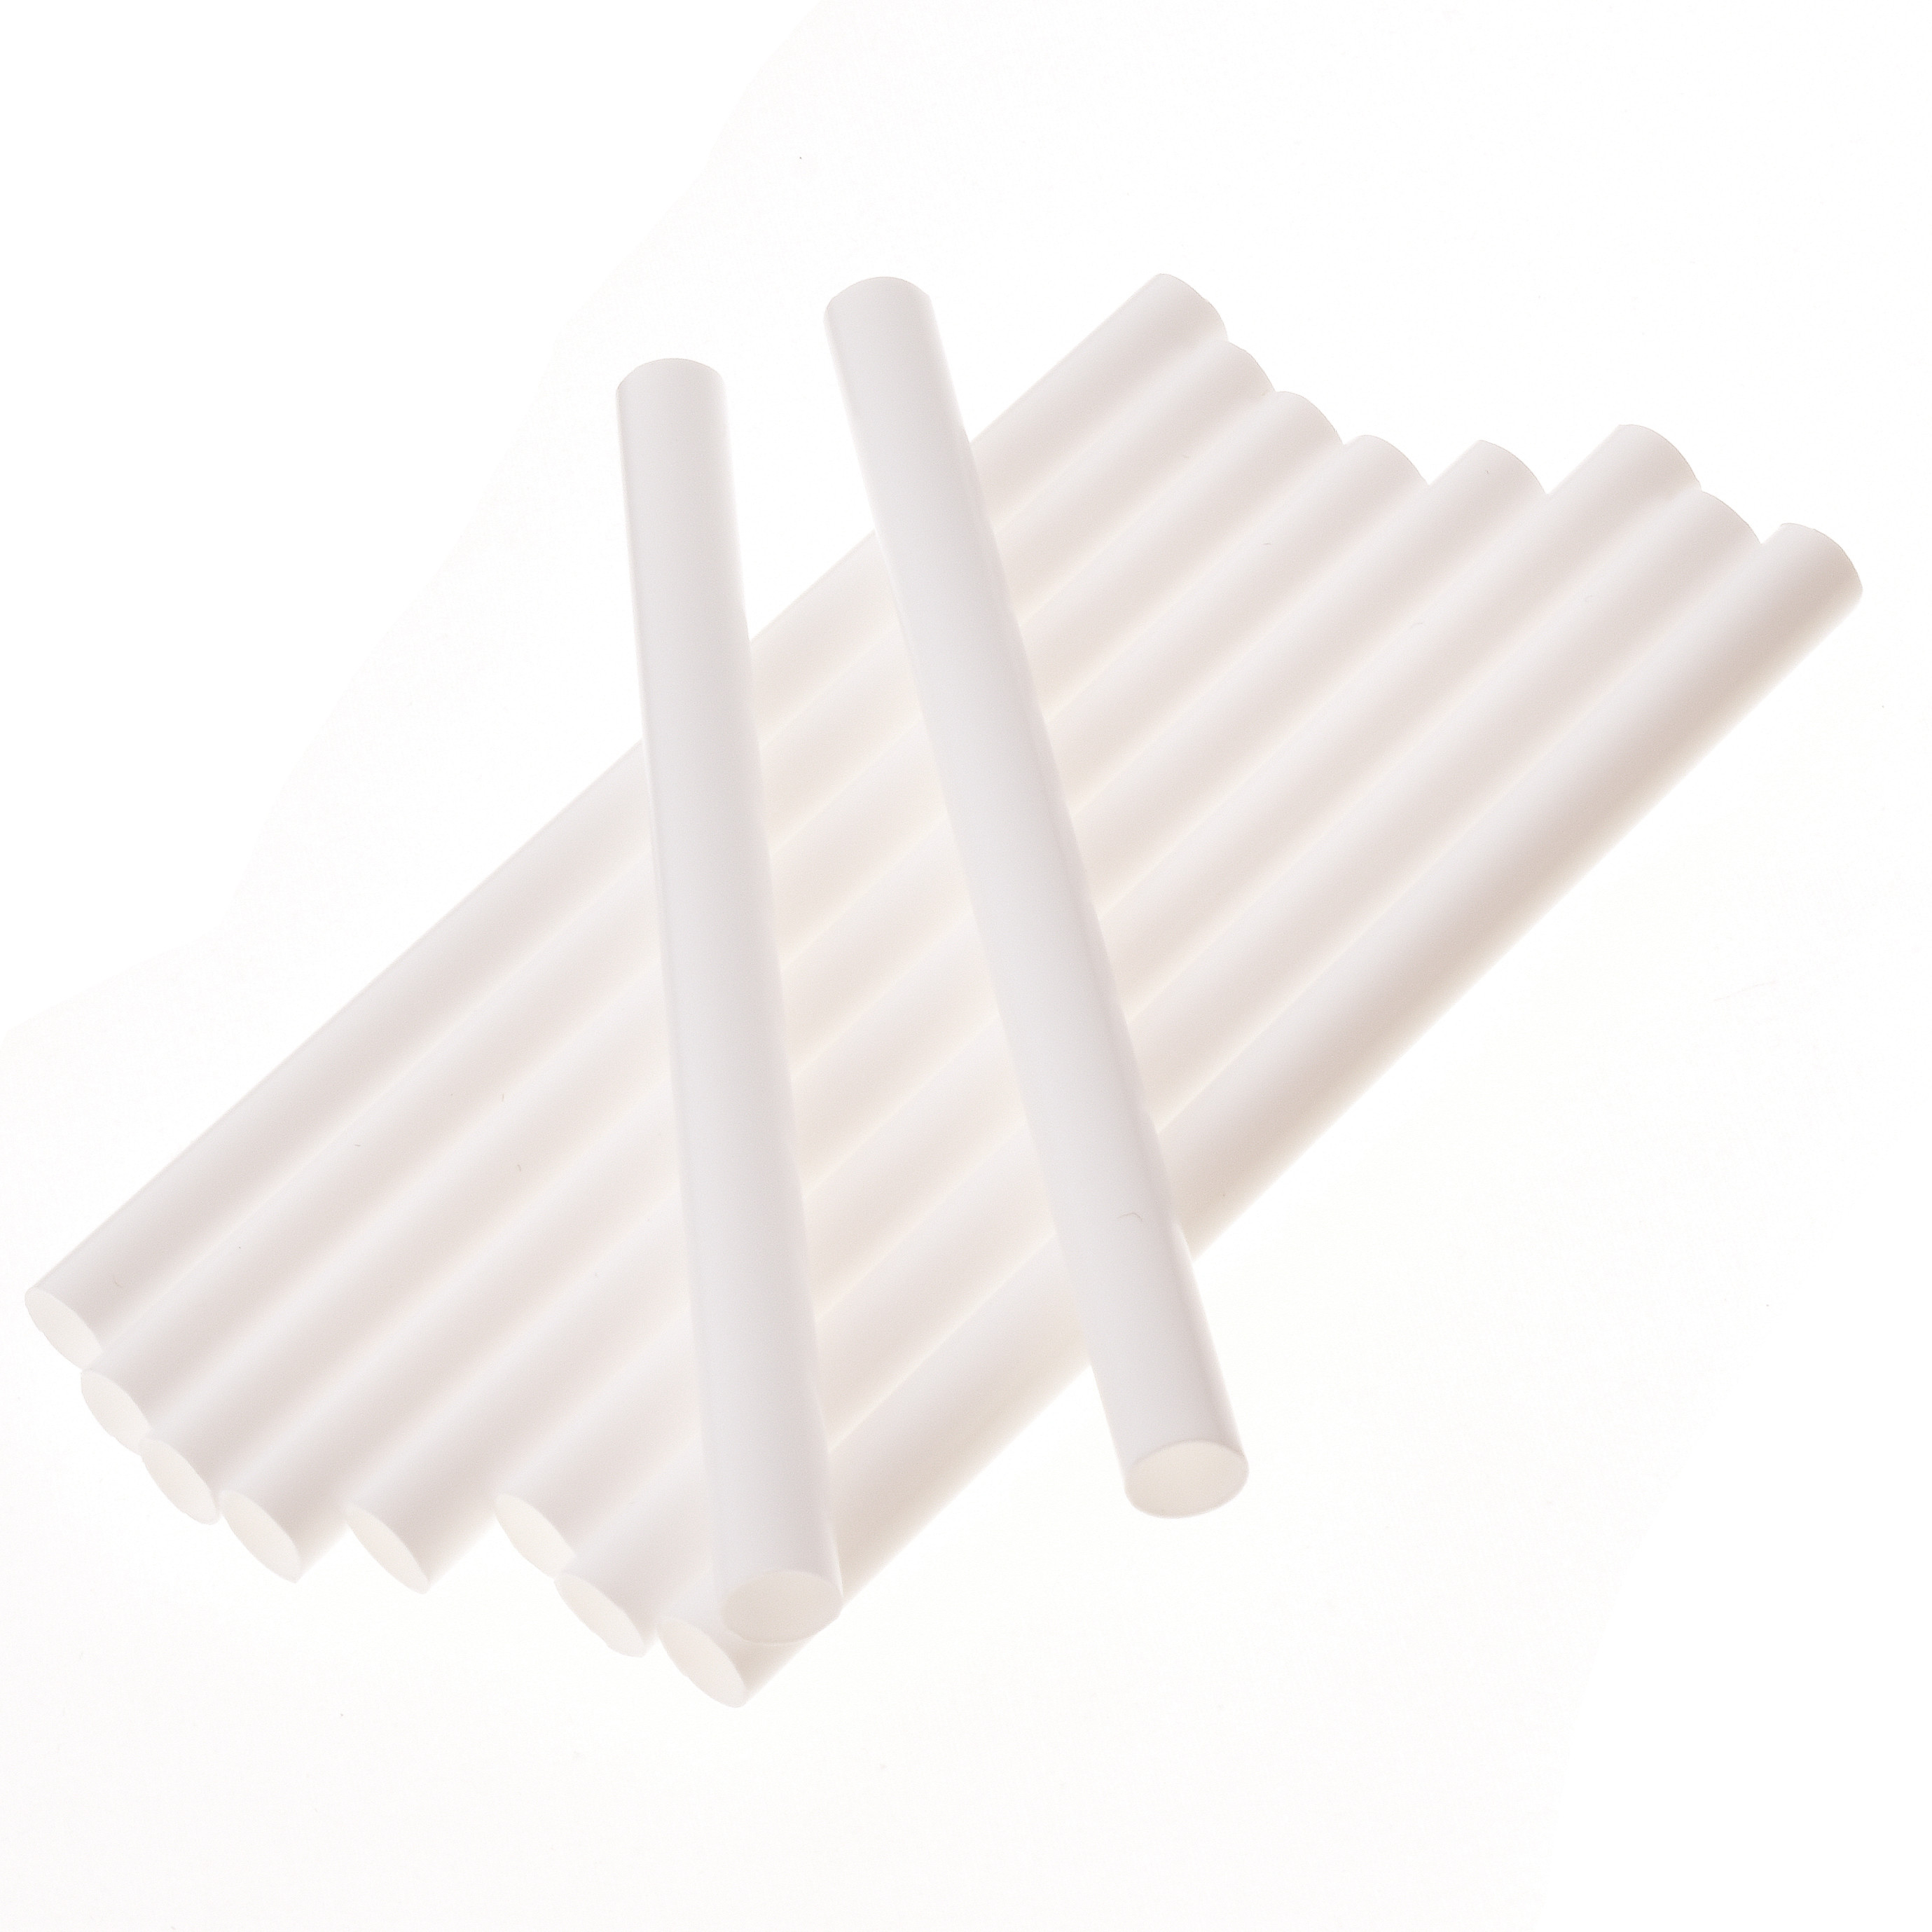 Novo Cup Replacement Straws